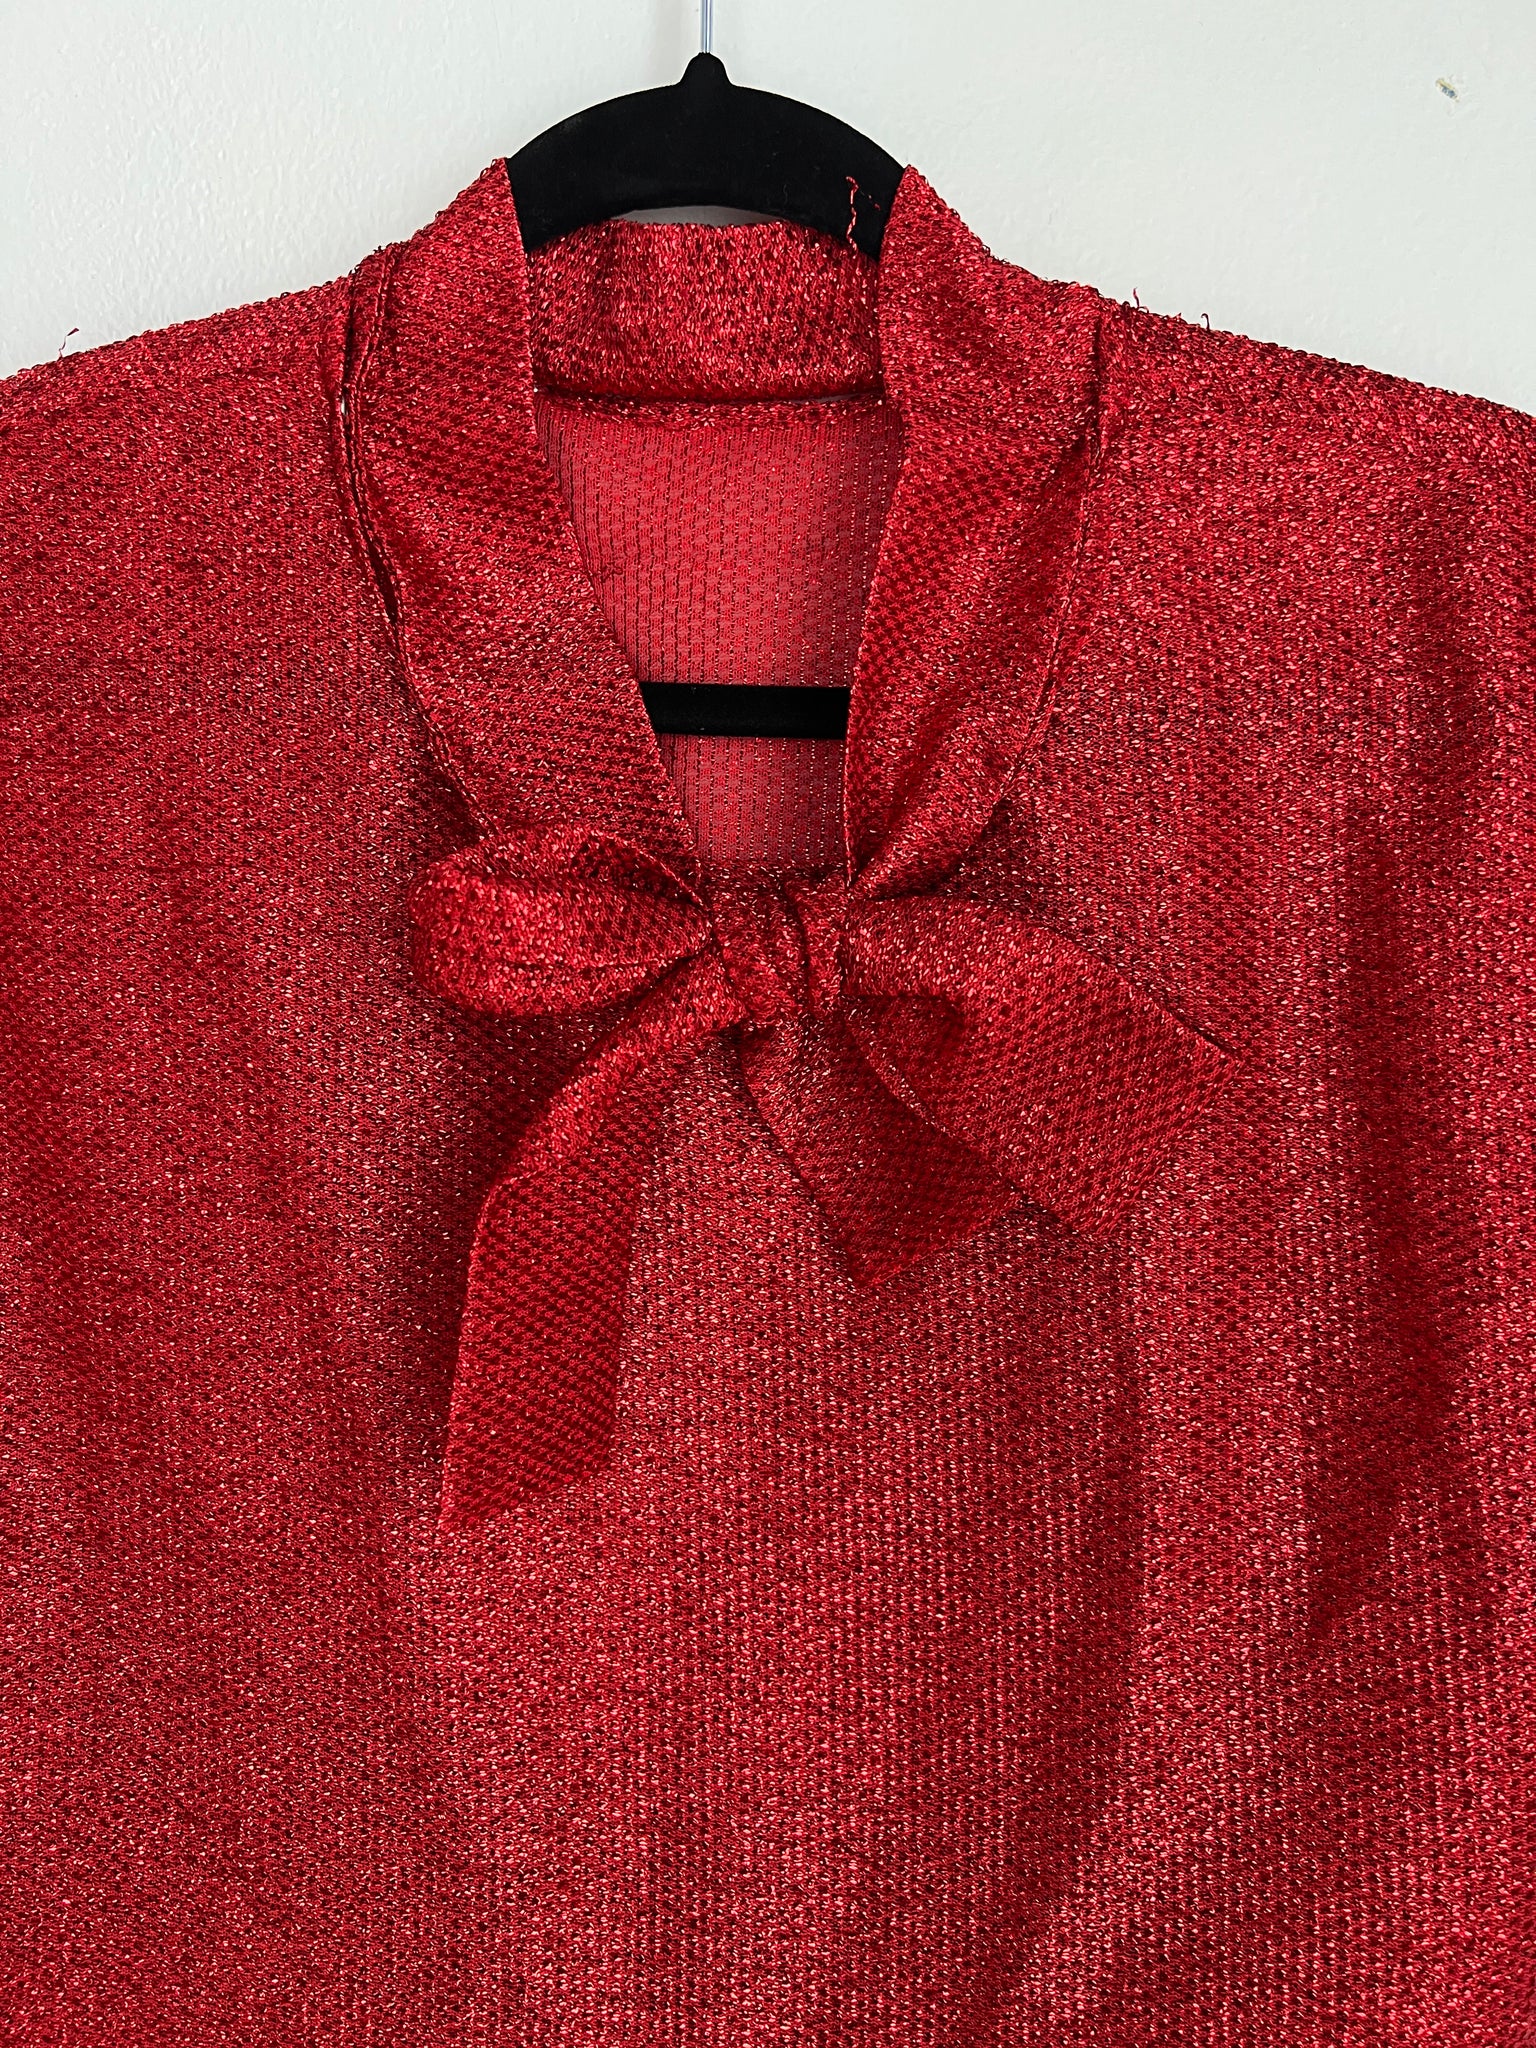 1970s TOP- red metaliic pussy bow disco